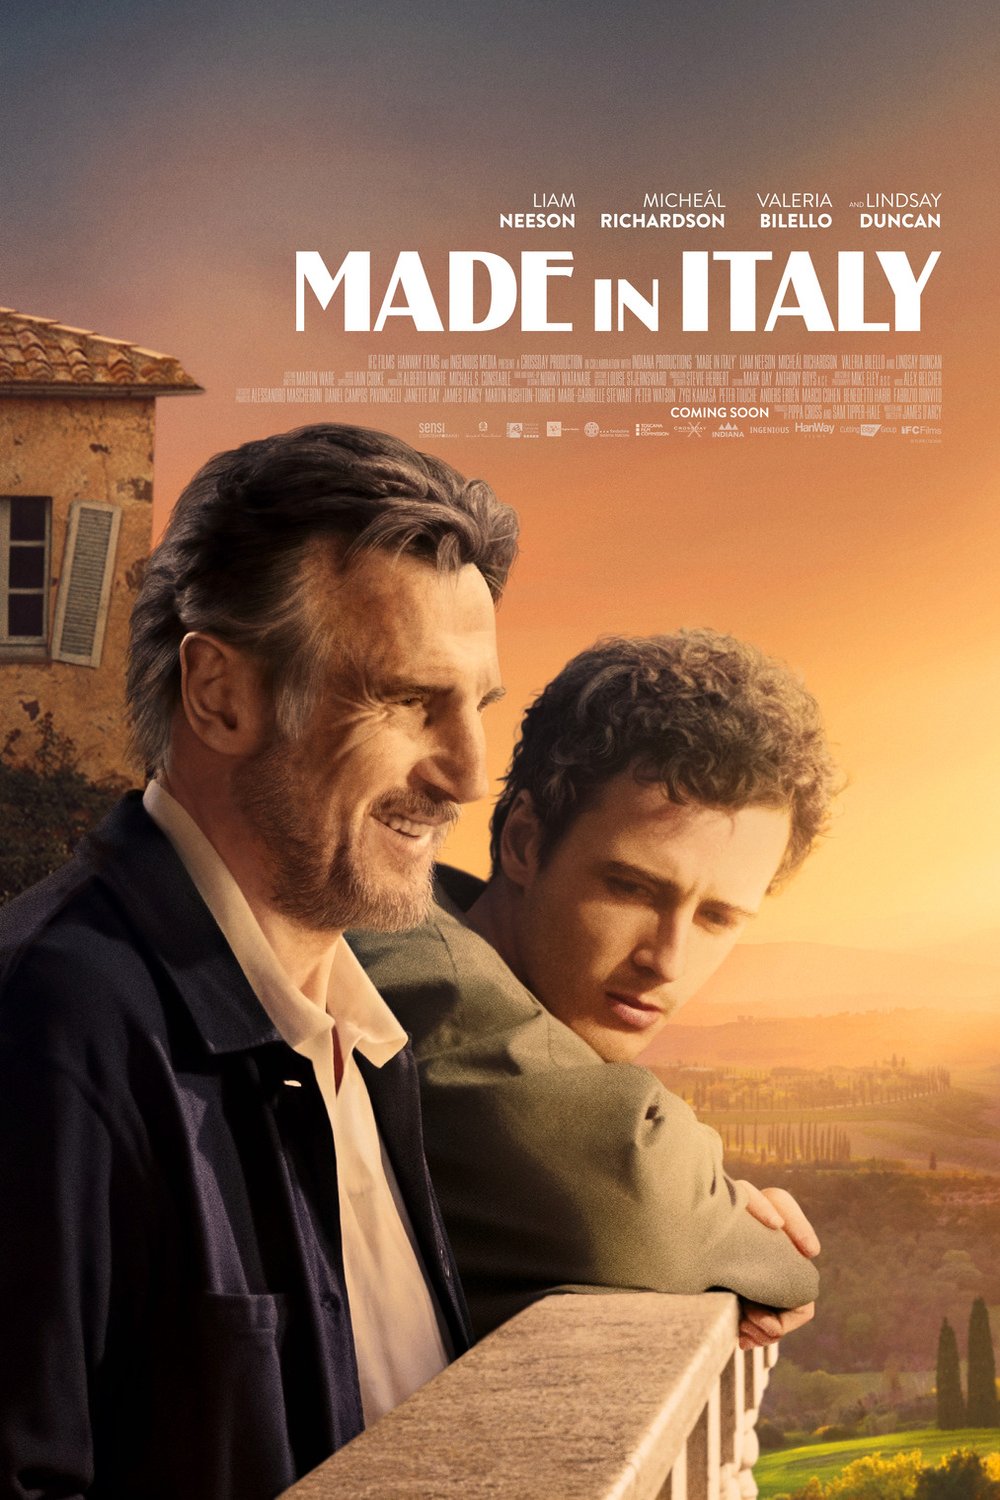 Poster of the movie Made in Italy